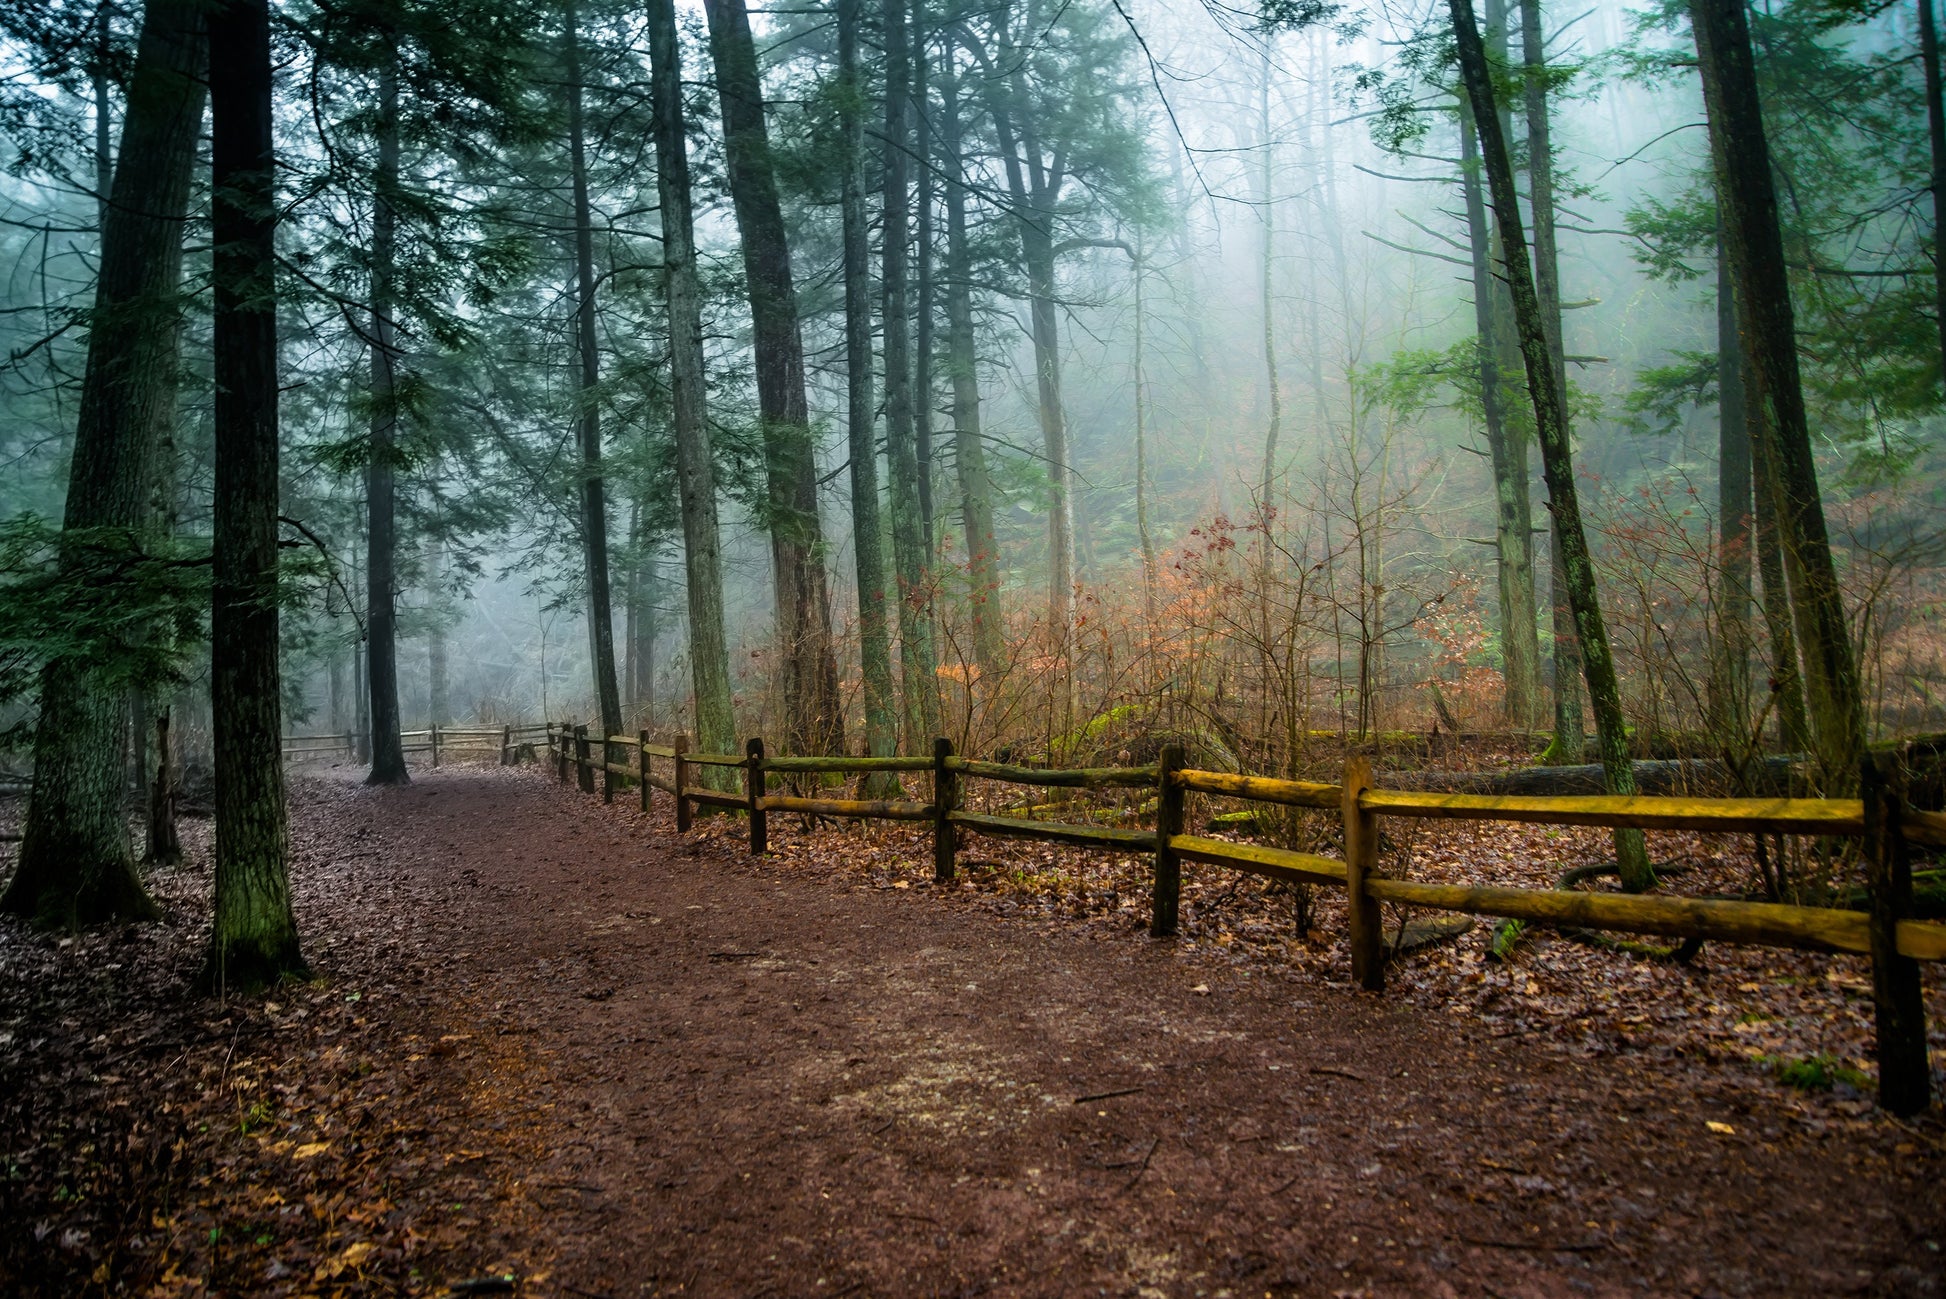 Foggy Path - Jacobsburg State Park, Nature Art Prints, Tree Photography, Lovely Woods, Forest Print, Gift for Hiker, Nature Lover Gift